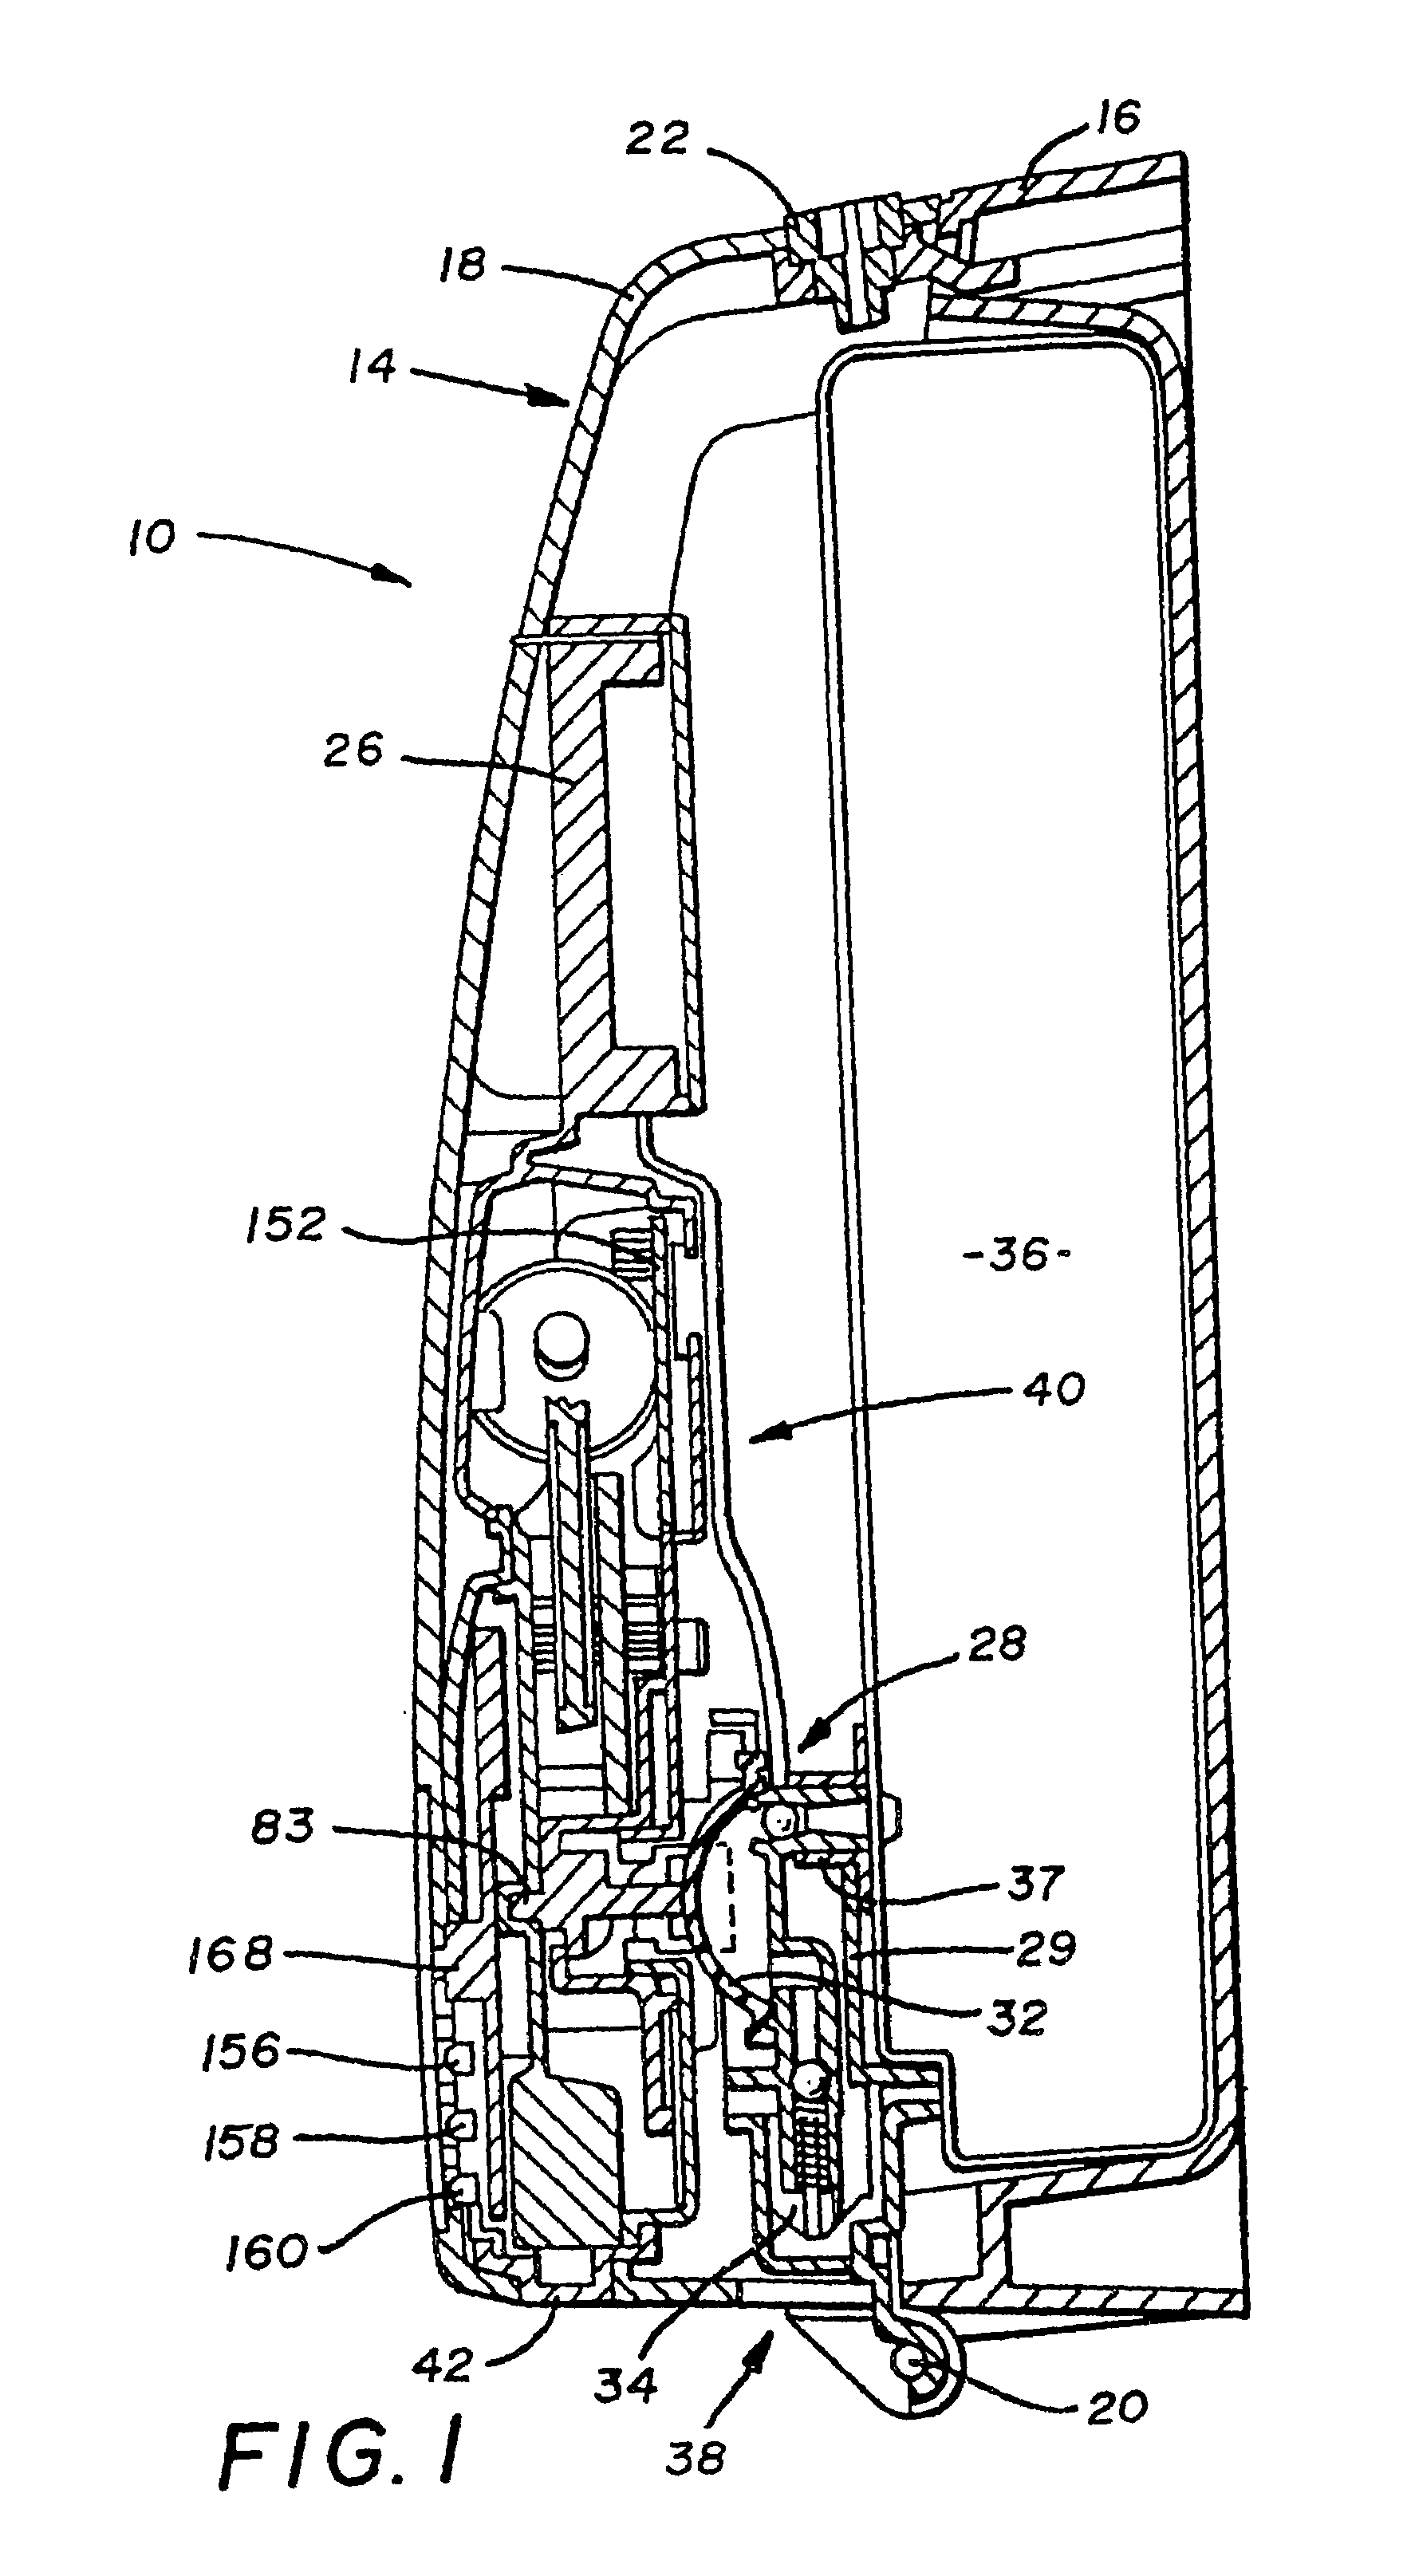 Apparatus for hands-free dispensing of a measured quantity of material